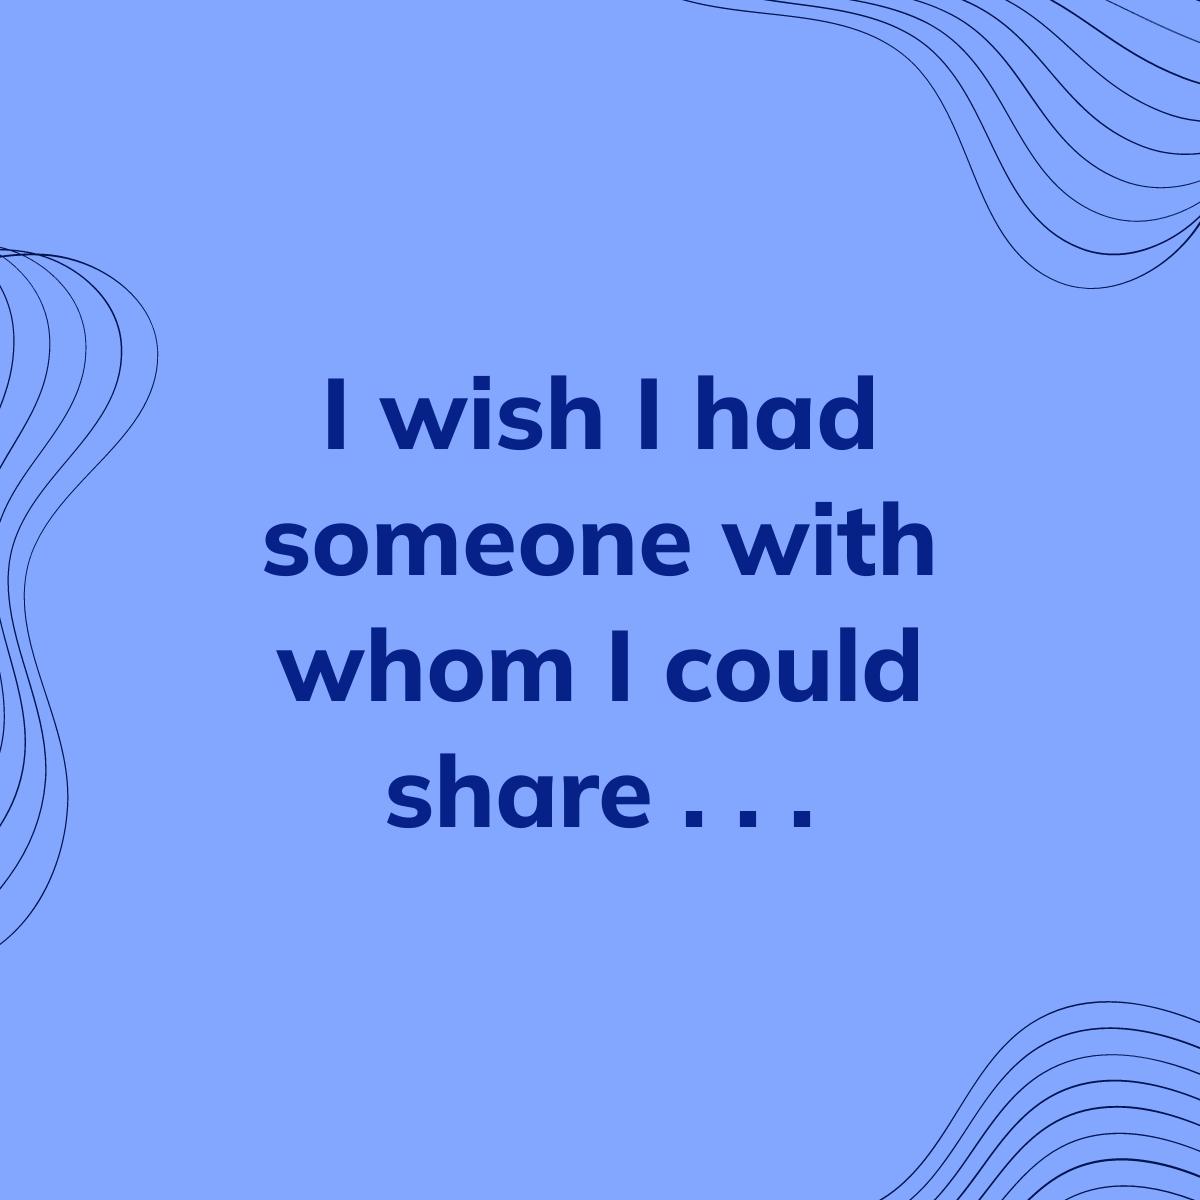 Journal Prompt: I wish I had someone with whom I could share . . .